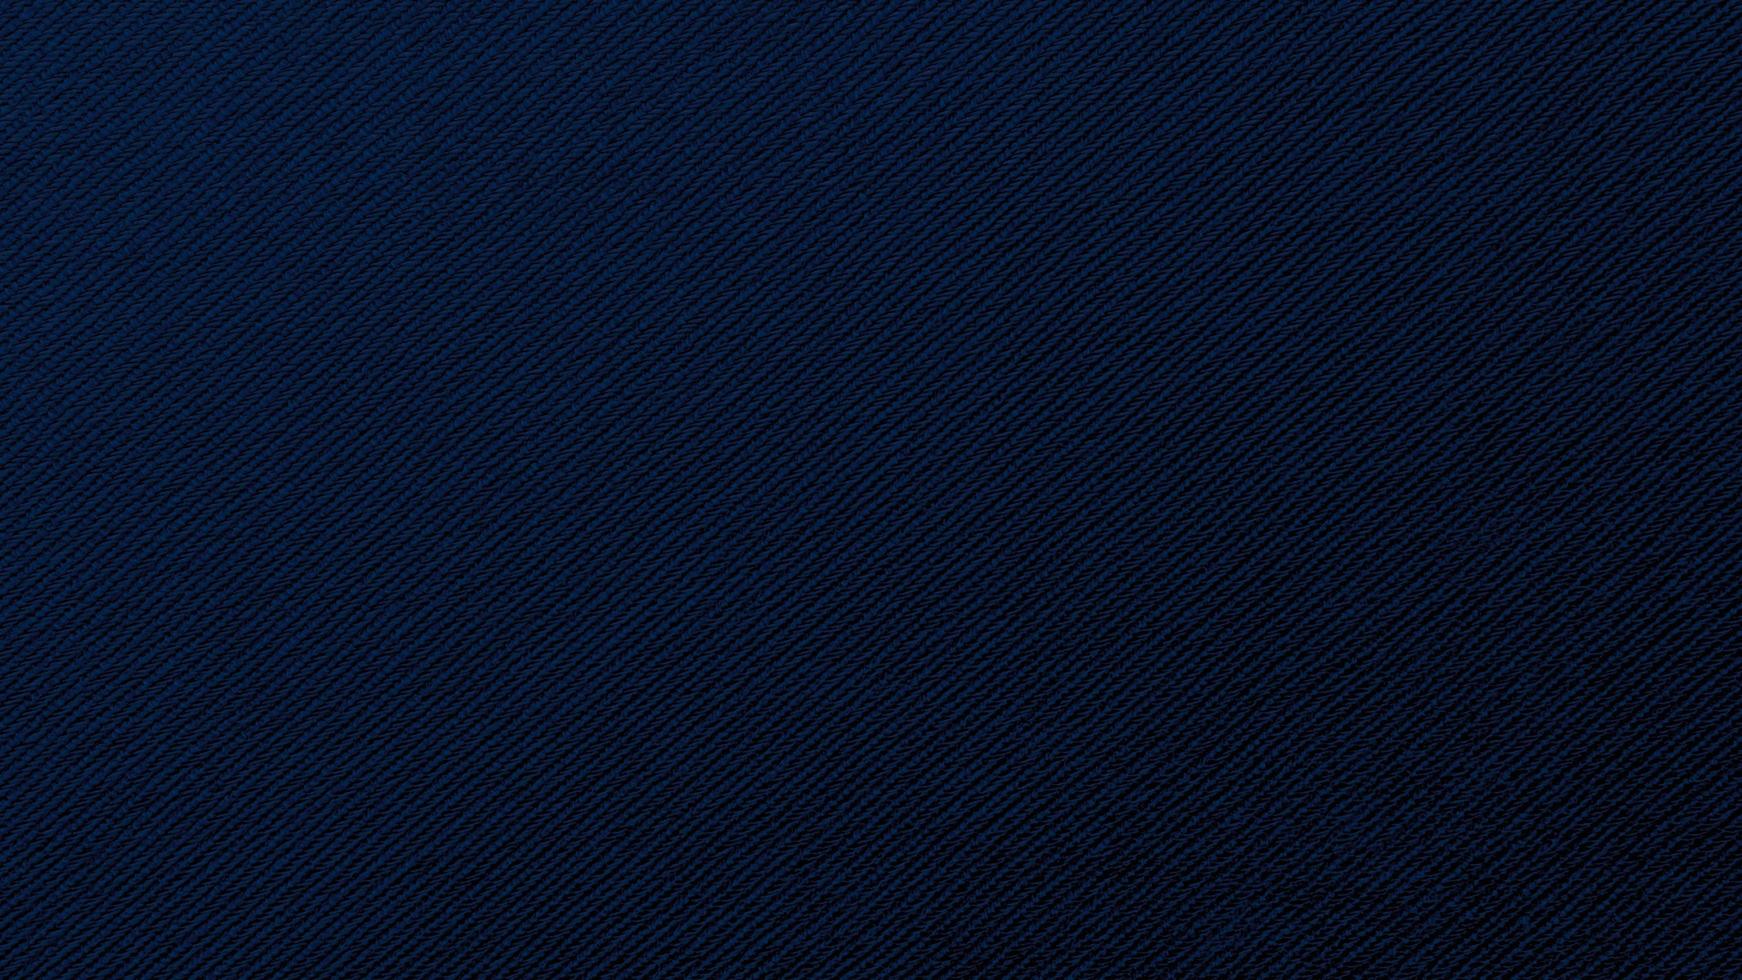 Textile texture black for background or cover photo